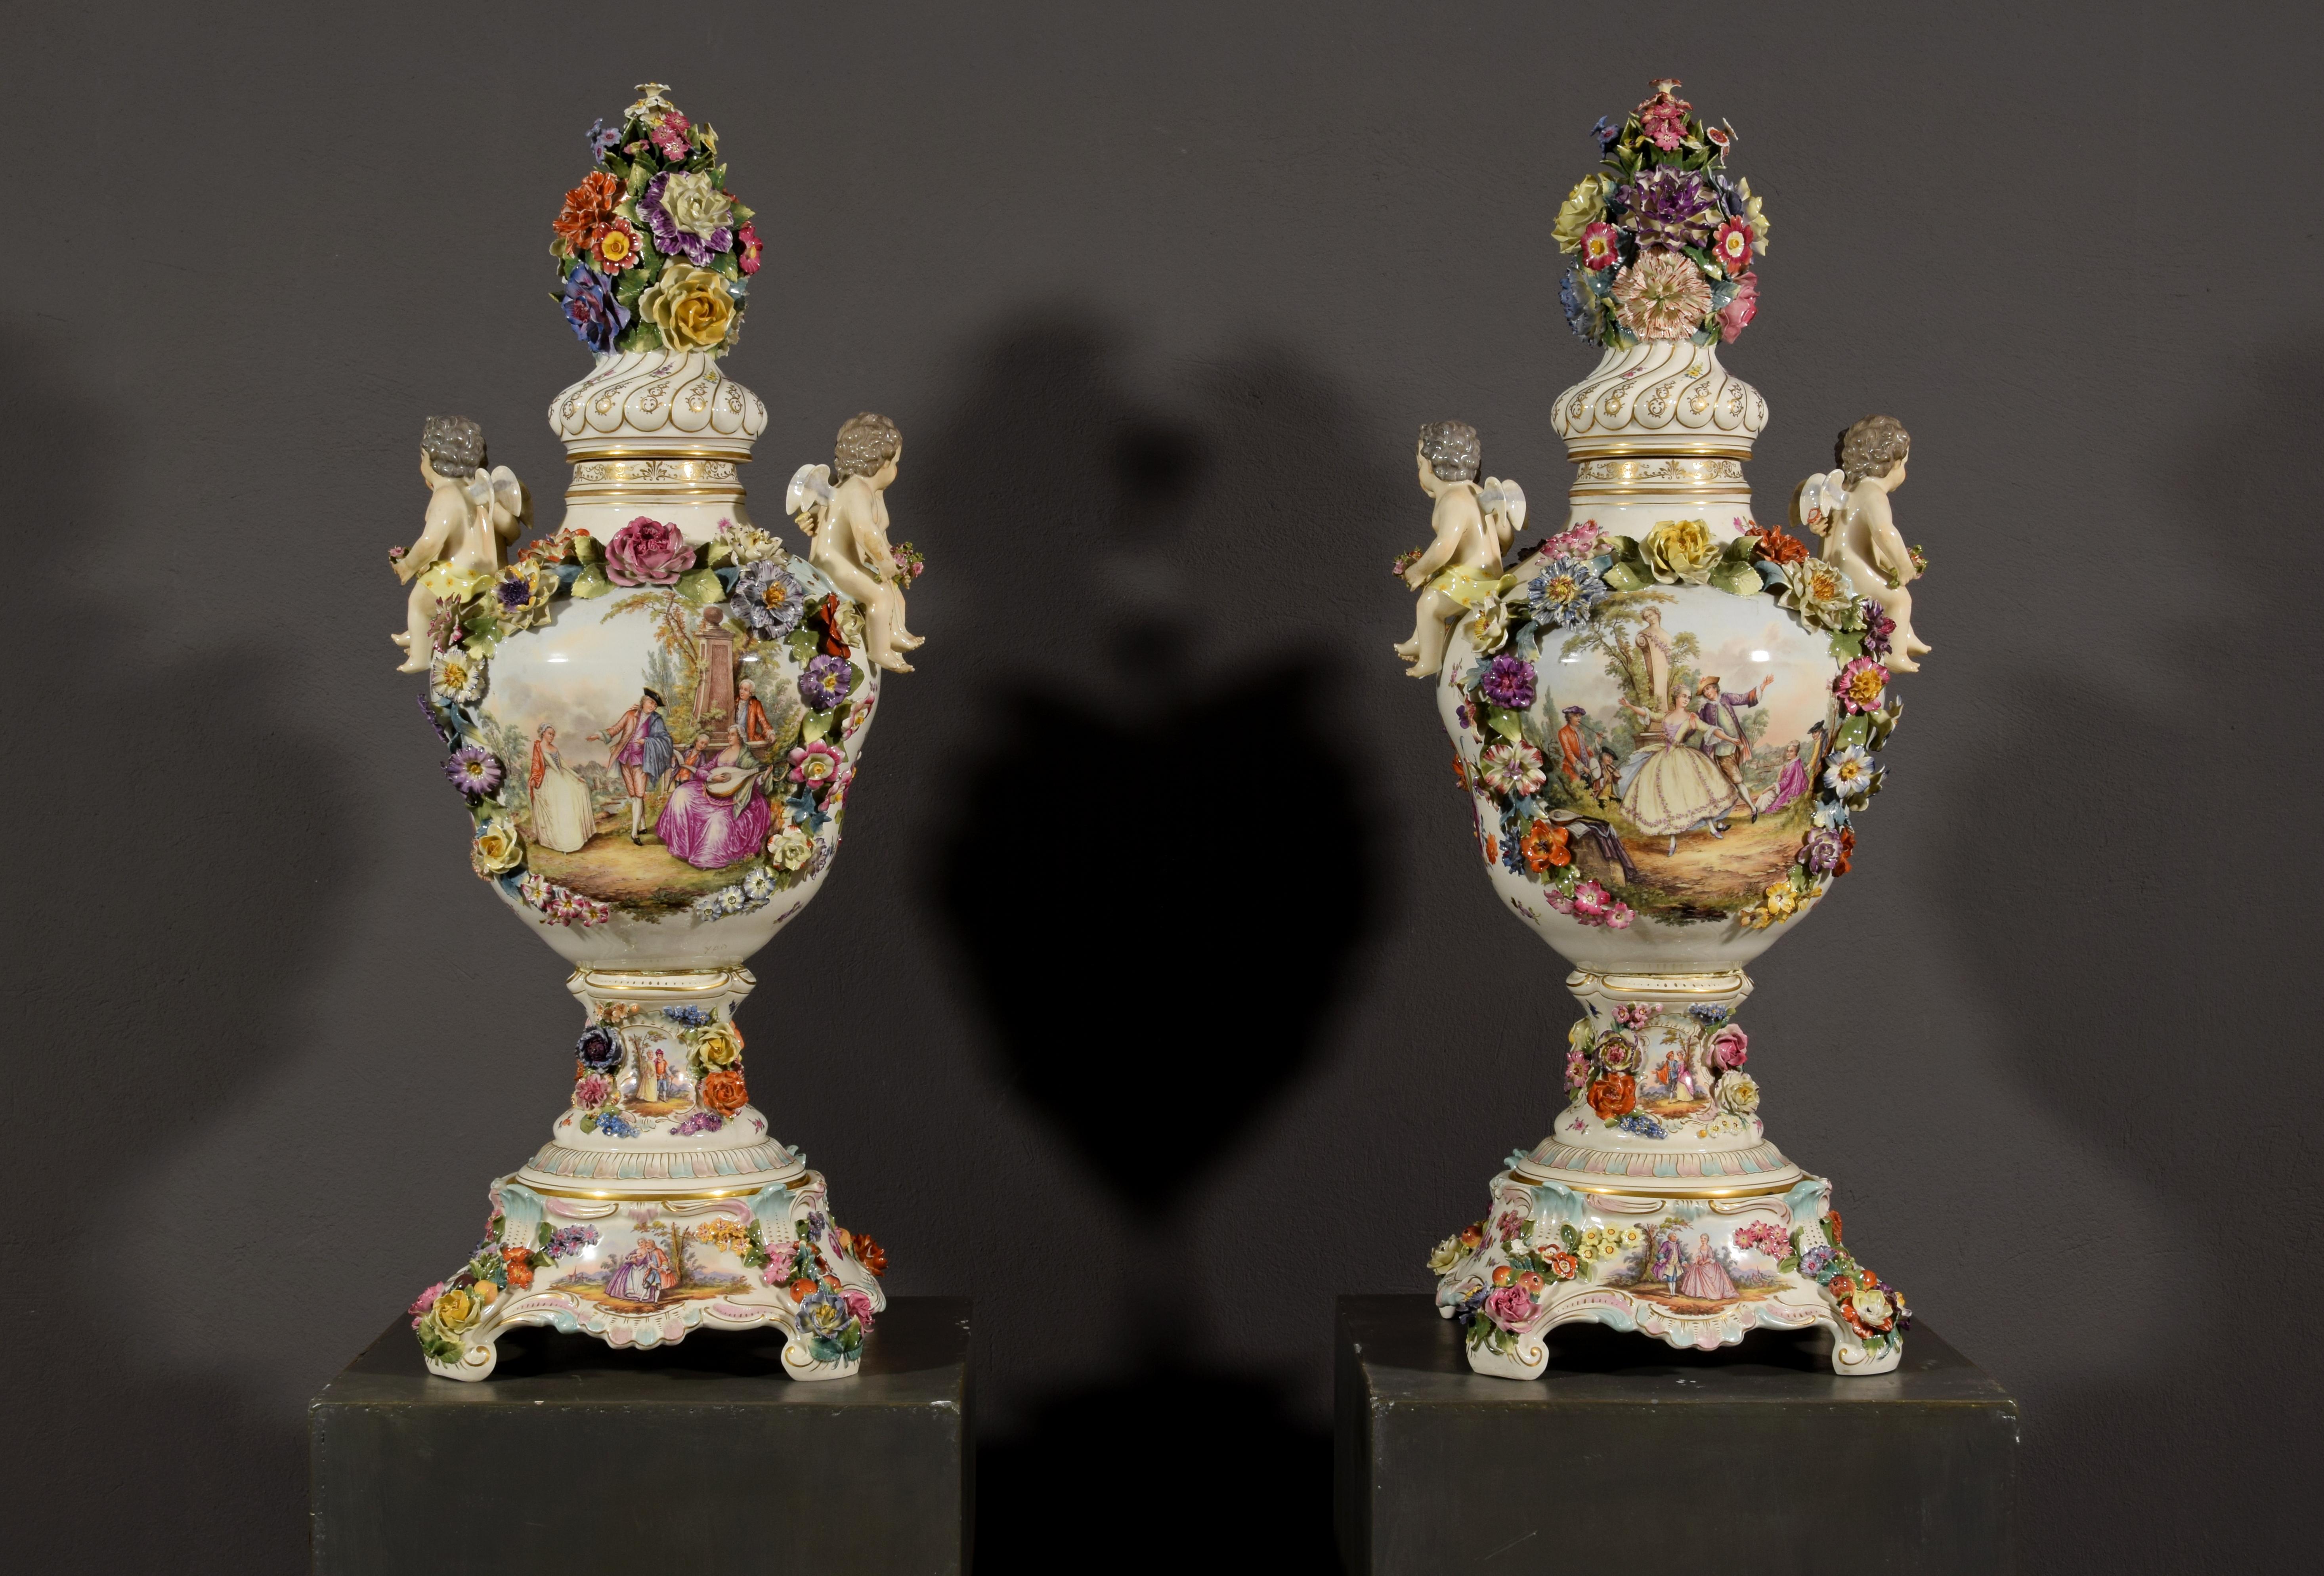 19th century pair of German polychrome porcelain vases
Measurements: cm H 86,5 x W 35 x D 31; base cm 31 x 31
blue color mark 

This delightful pair of beautiful vases was made in the nineteenth century in Germany. Entirely in porcelain, the